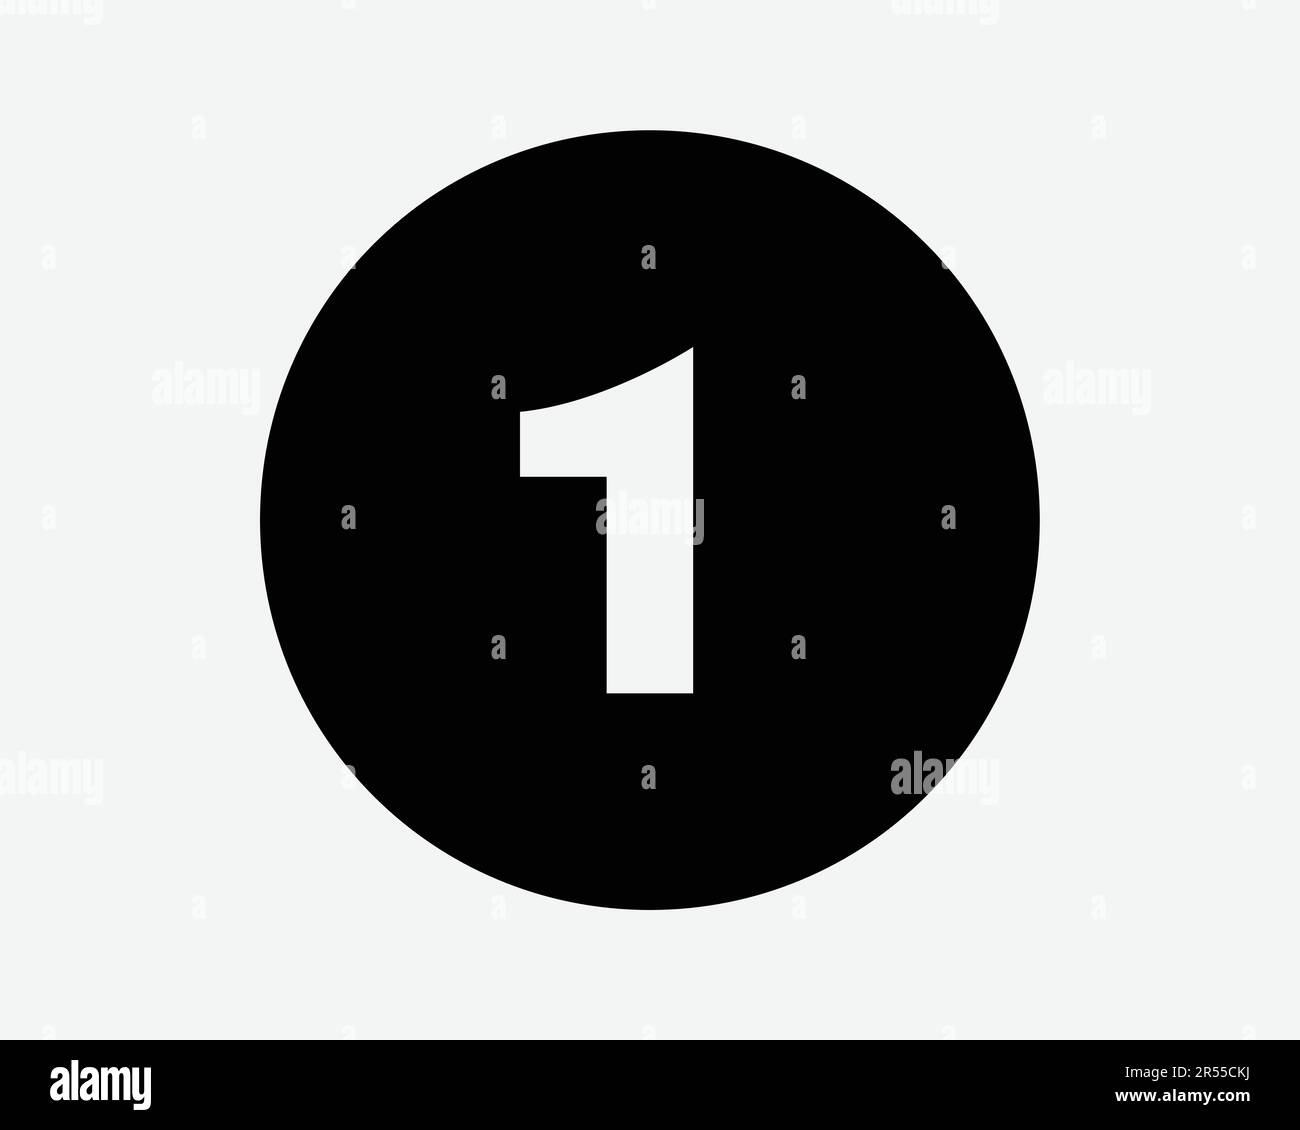 Number One Round Icon. 1 Circle Button First 1st Digit Math Win Won Winning Badge Sign Symbol Black Artwork Graphic Illustration Clipart EPS Vector Stock Vector